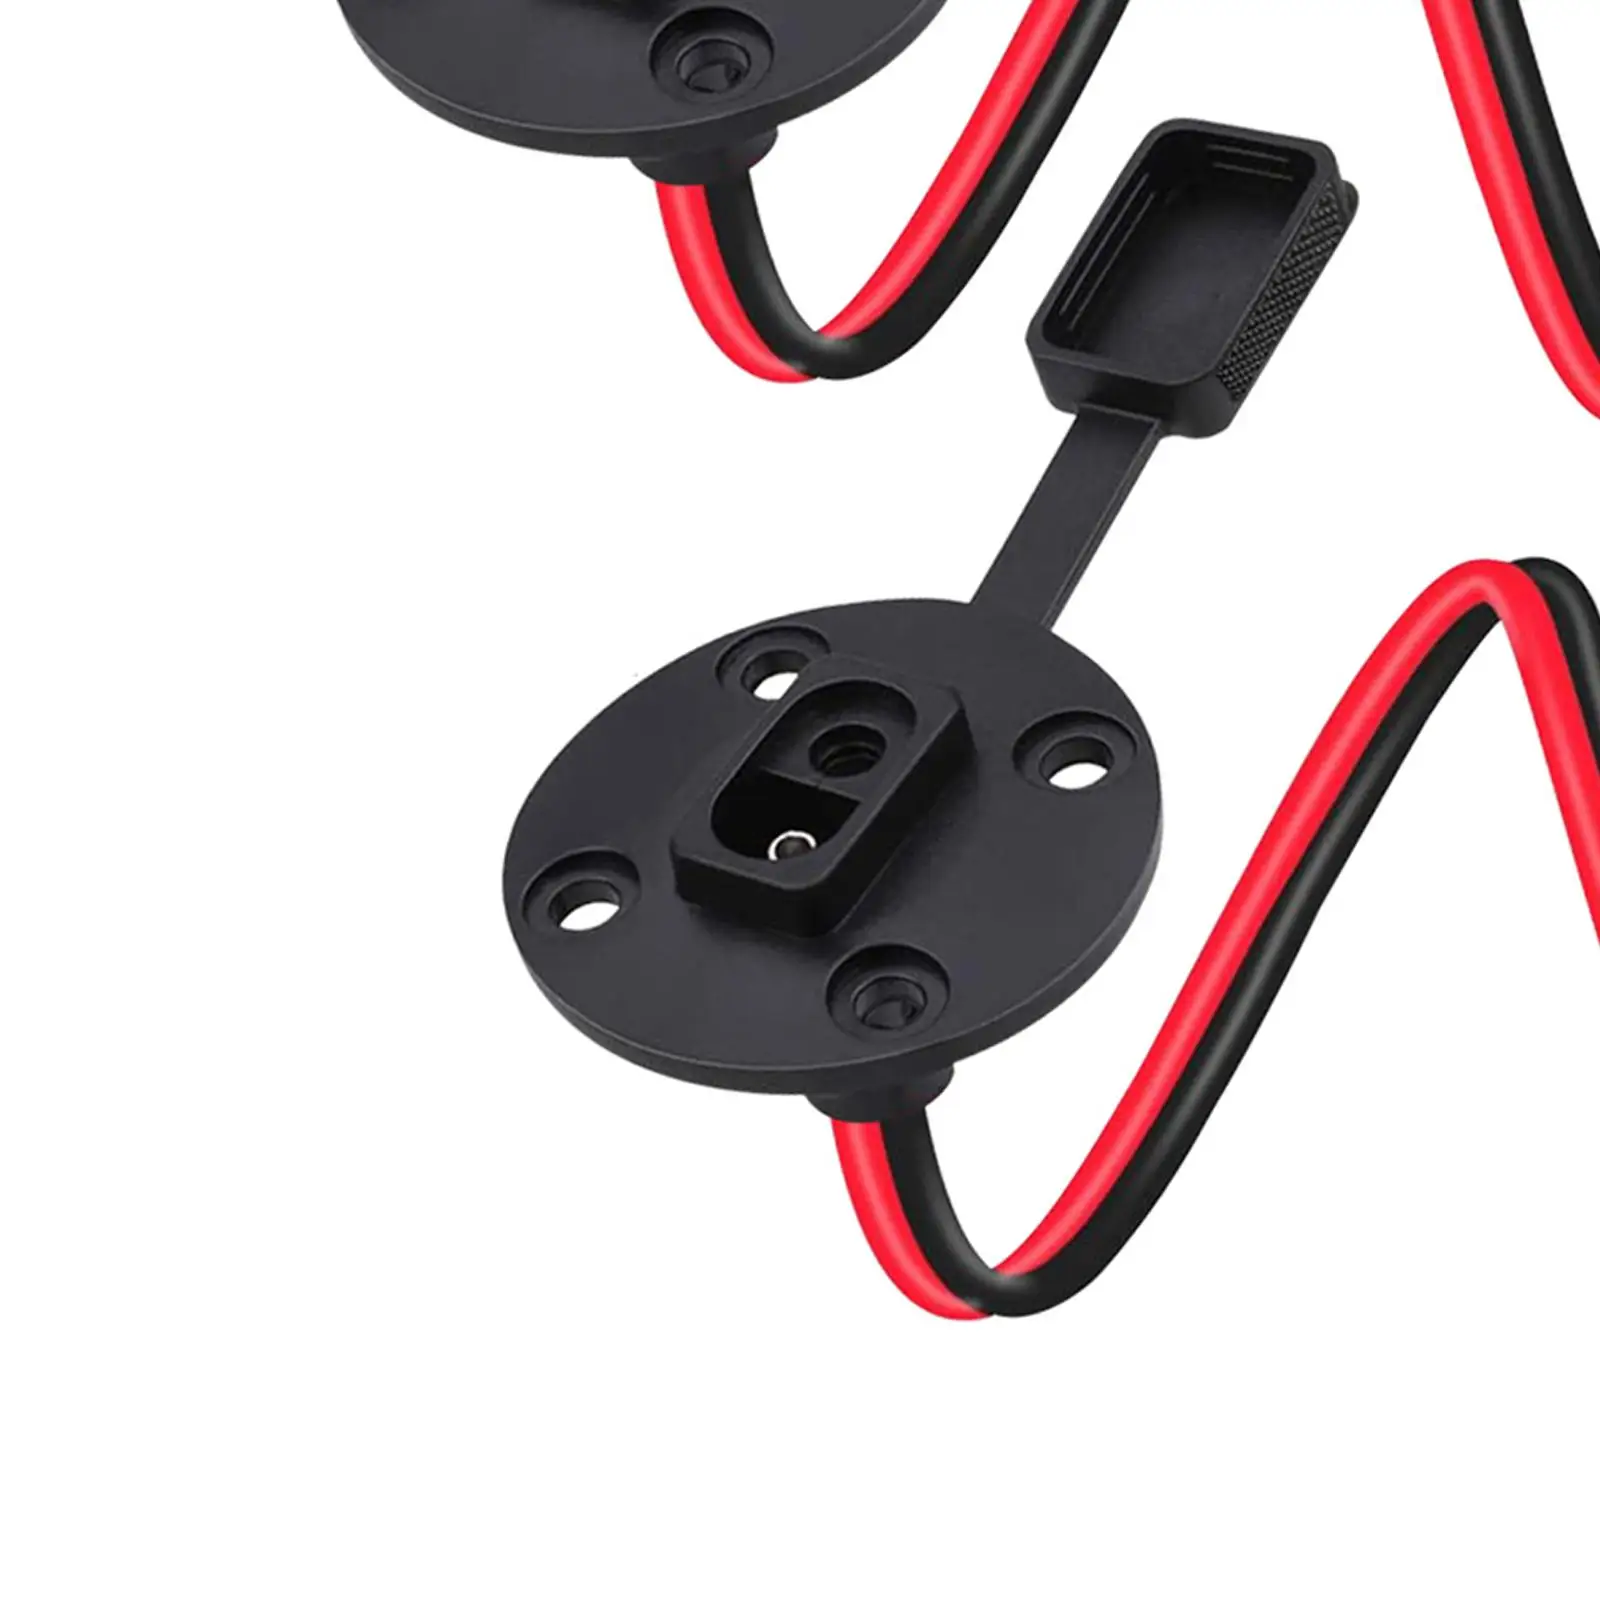 2Pcs SAE Socket DC Power Automotive Waterproof Cap Tractor Harness Extension Cord SAE Battery Connector SAE Plug Charging Cable